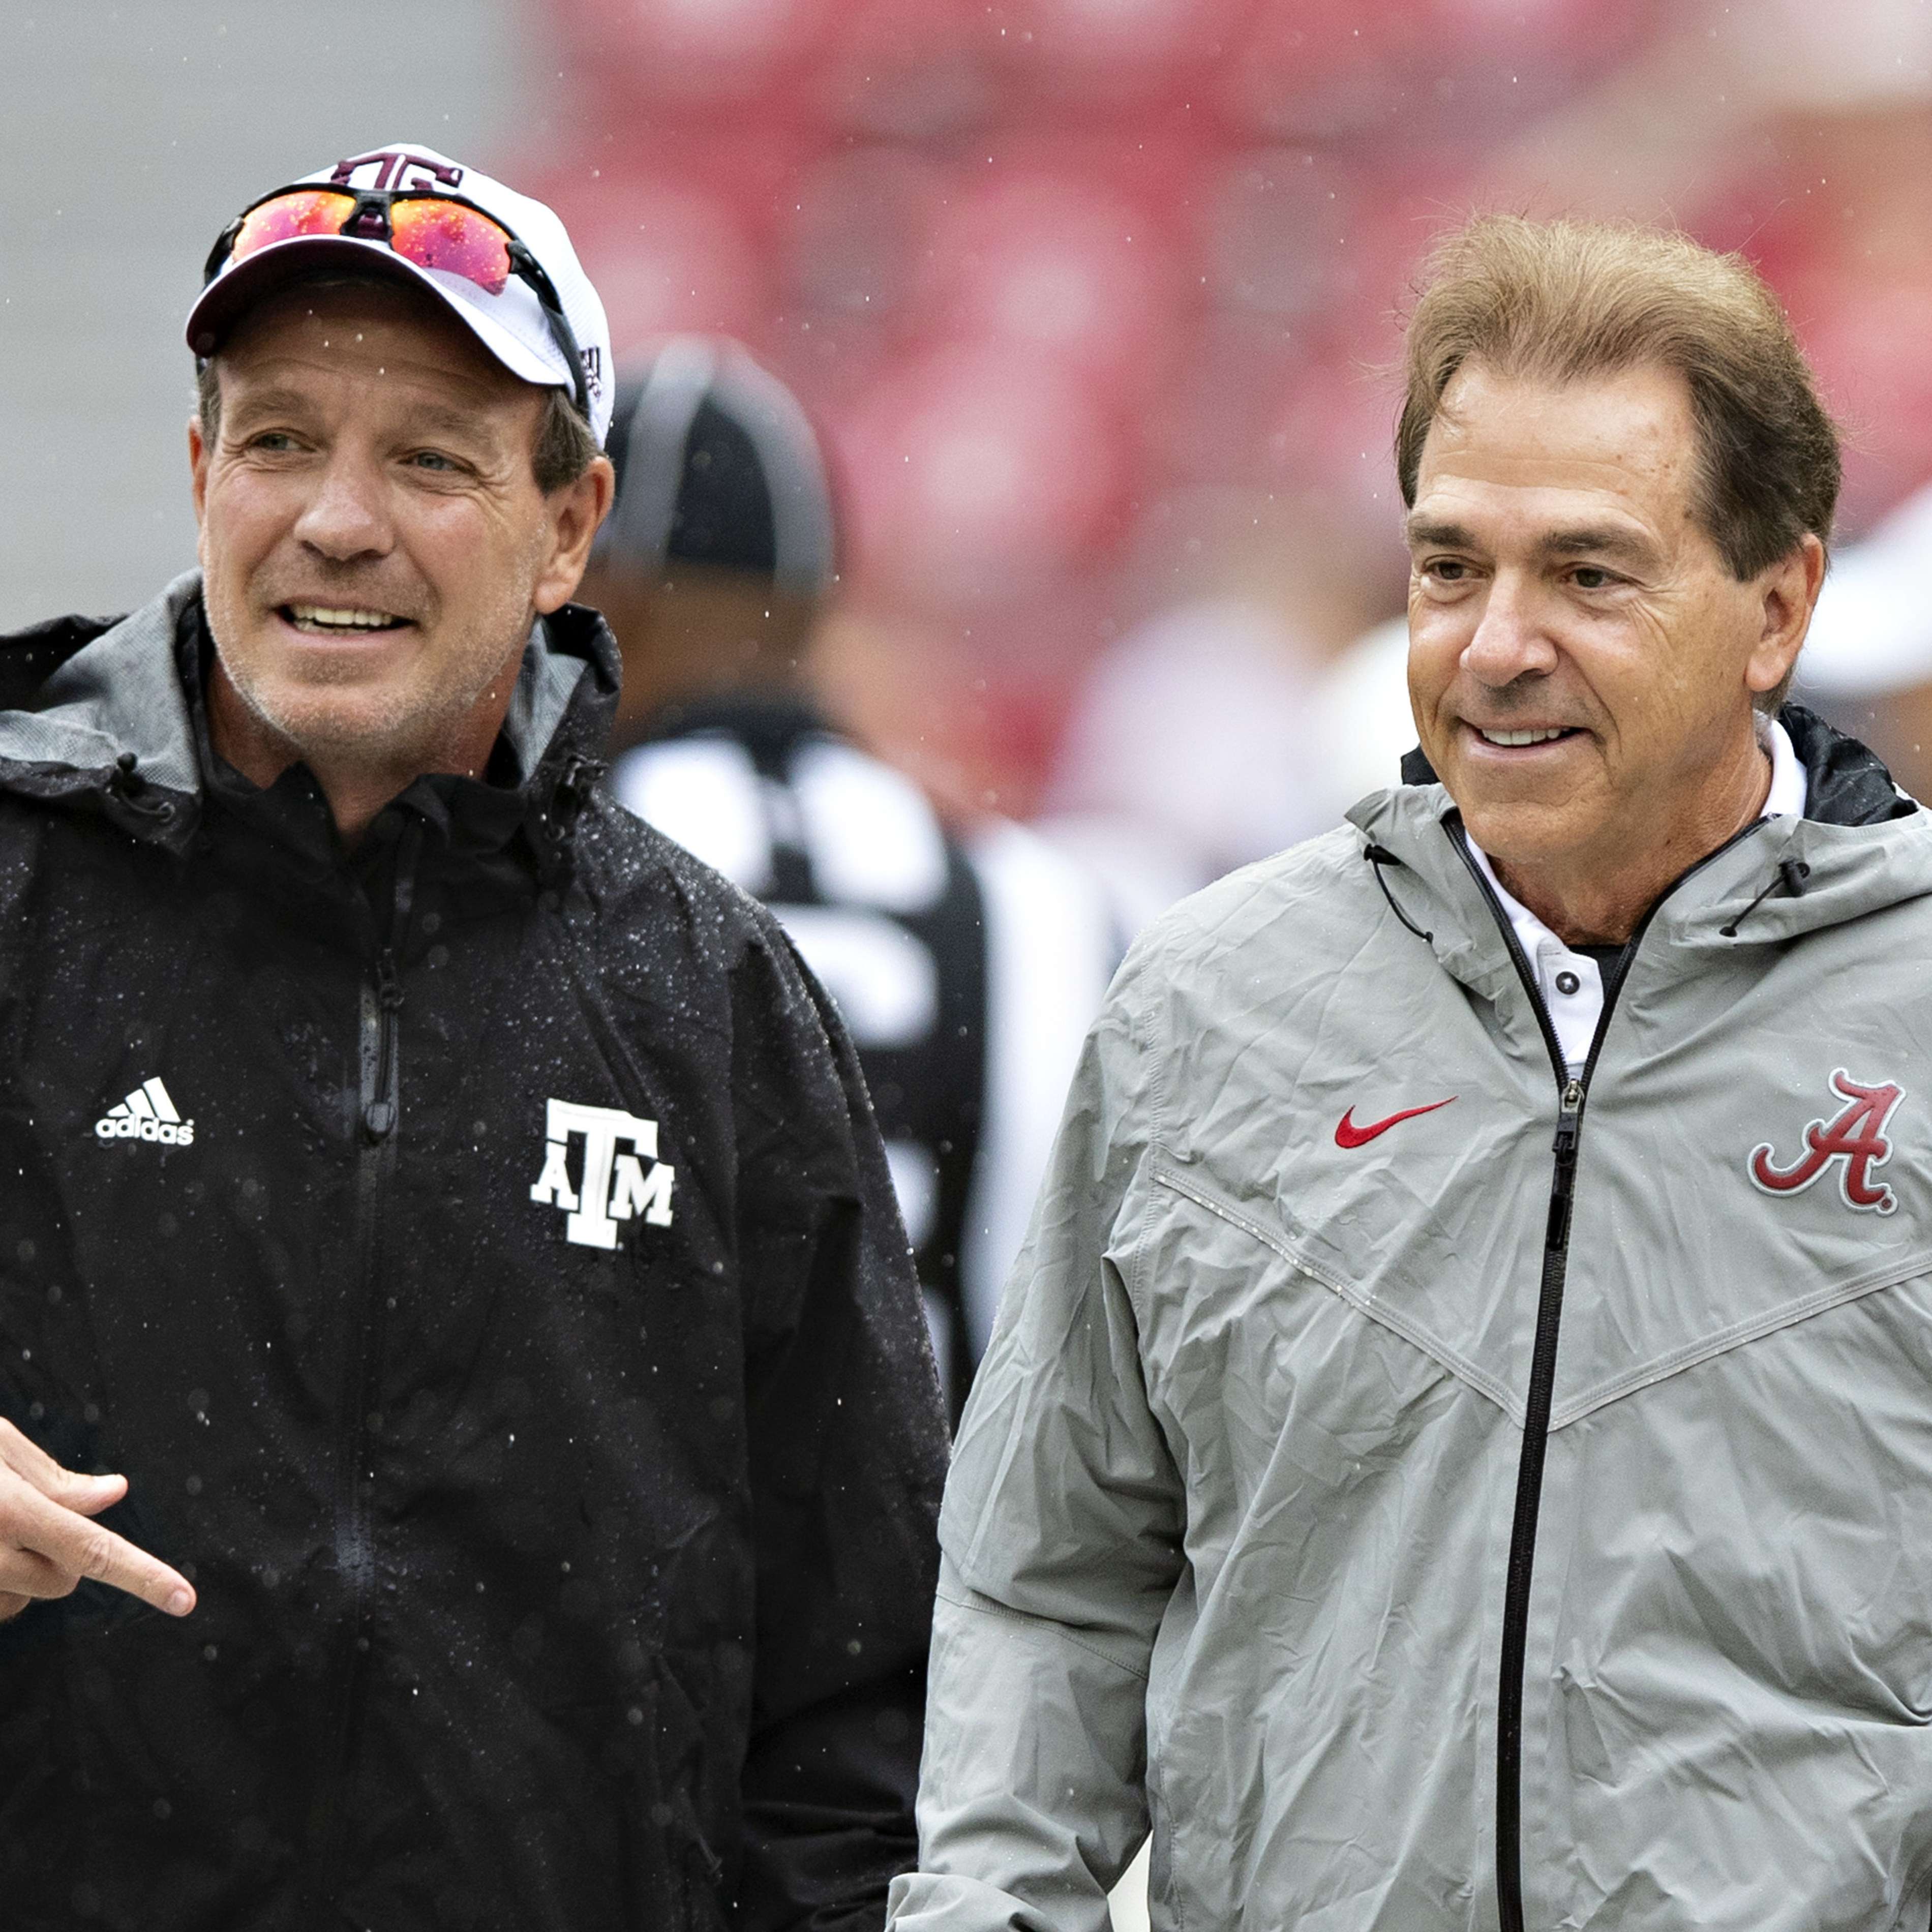 Jimbo Fisher Says Nick Saban's Comments on NIL, Texas A&M Recruiting Are 'Despic..